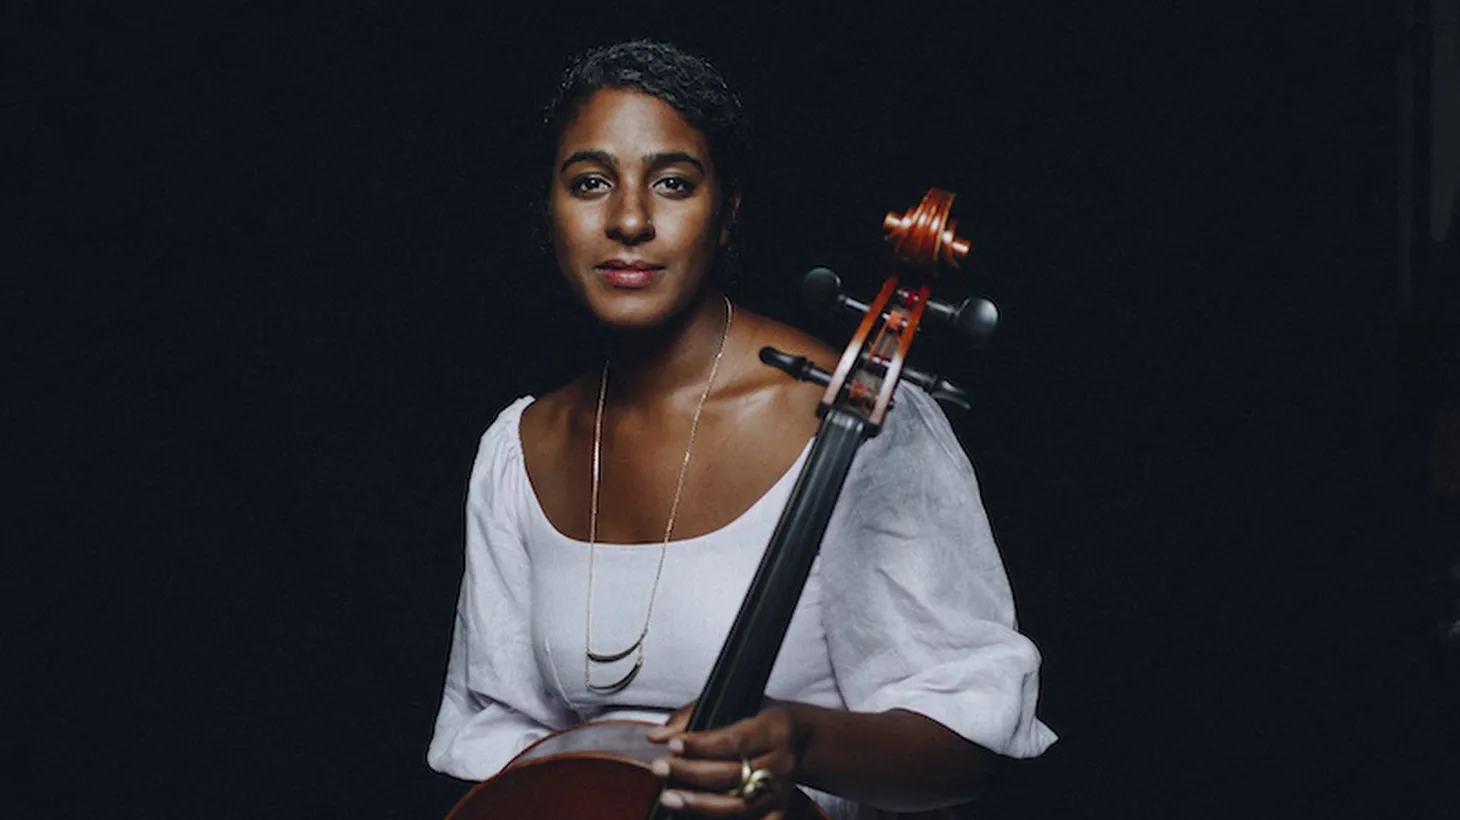 Based in New Orleans, Leyla McCalla is a talented multi-instrumentalist known for her work in Carolina Chocolate Drops and her project Our Native Daughters, alongside Rhiannon Giddens, Allison Russell, and Amythist Kiah.